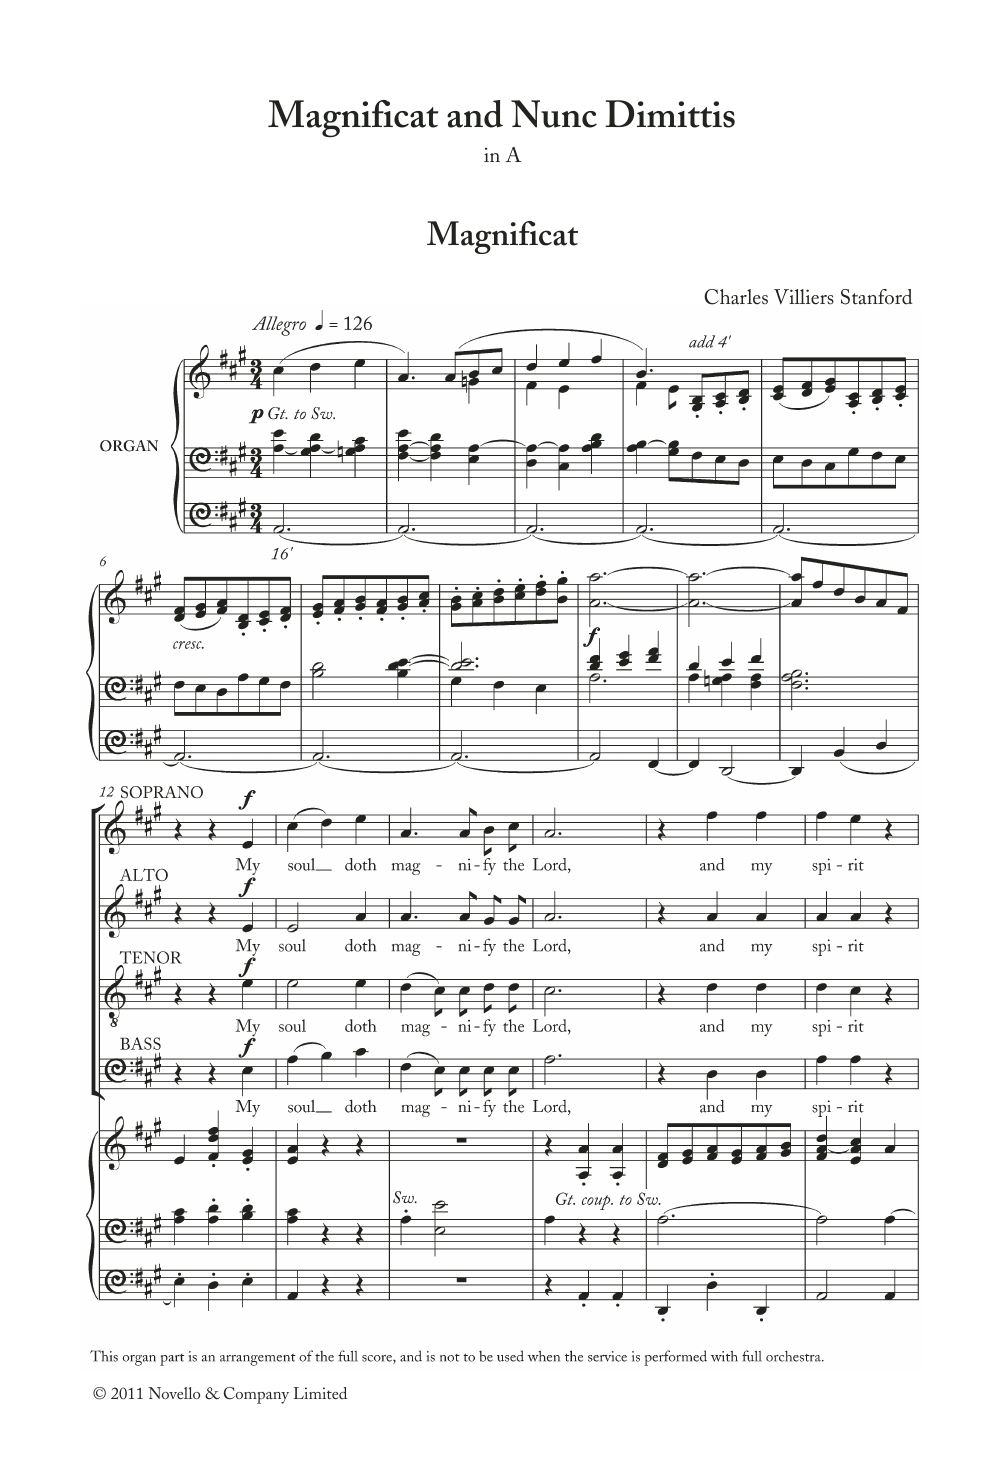 Download Charles Villiers Stanford Magnificat And Nunc Dimittis In A Sheet Music